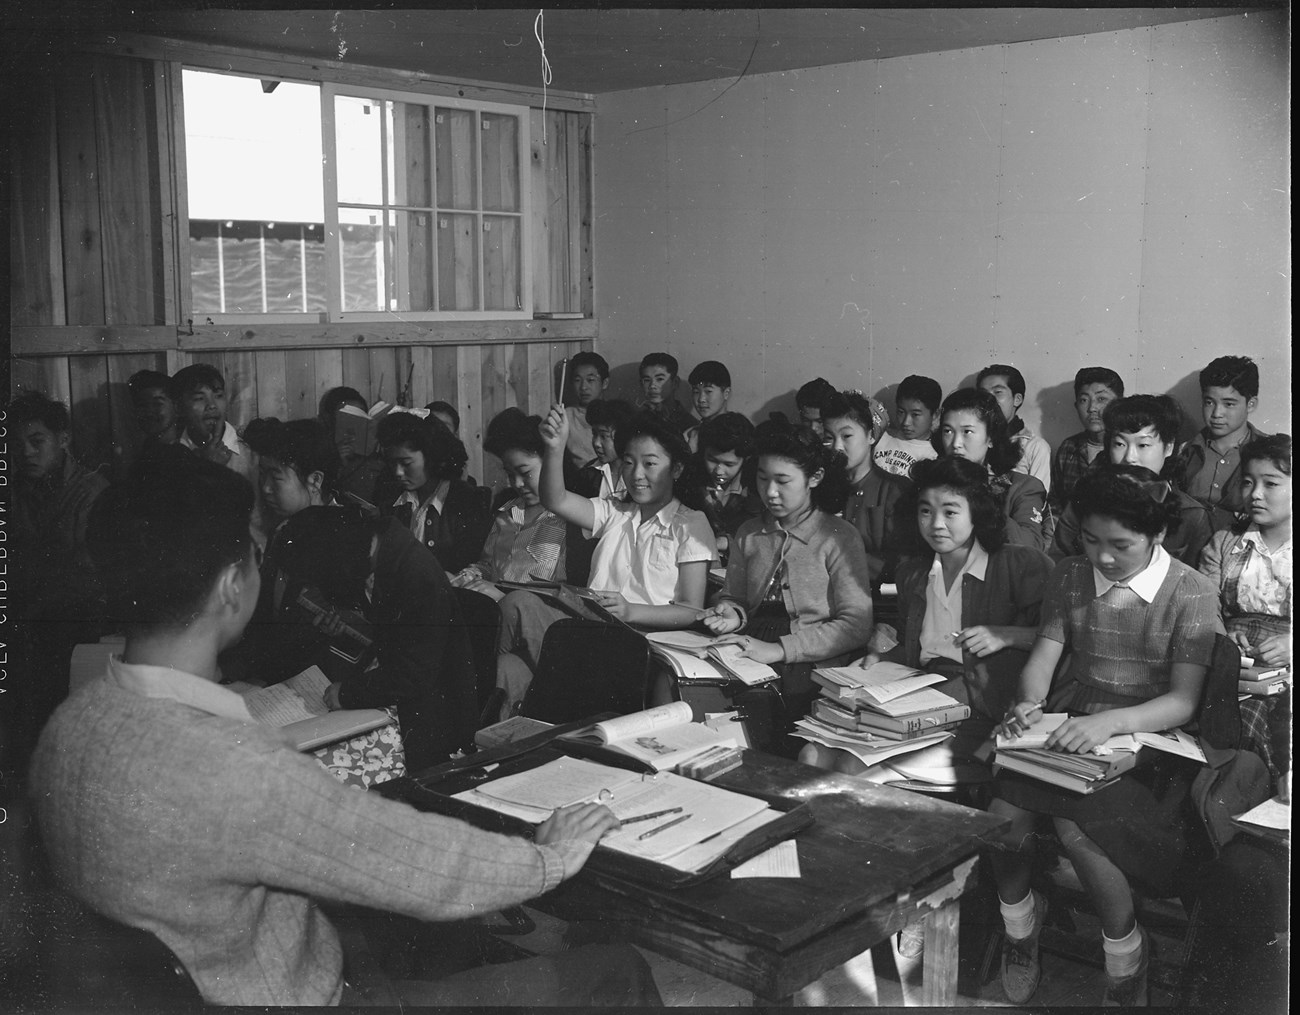 Bottom left we see the back of a man with his hand resting on an open notebook on desk. In front of him, facing the camera are four rows of students of Japanese ancestry with piles of books on their laps. One young woman is raising her hand and smiling.